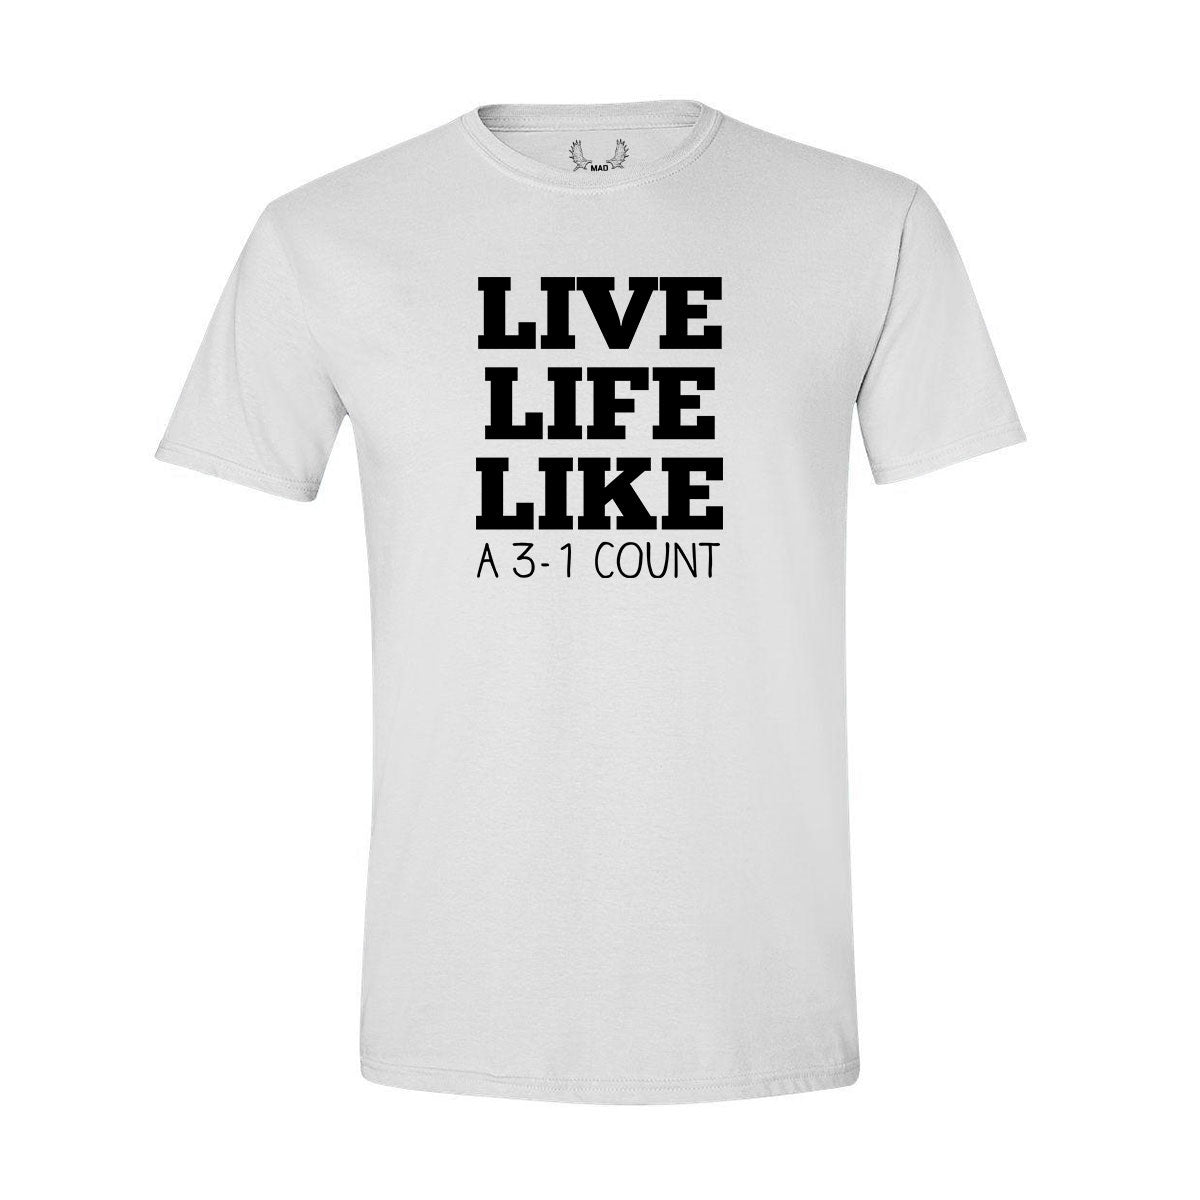 Baseballism - Live your life like a 3-1 count and look